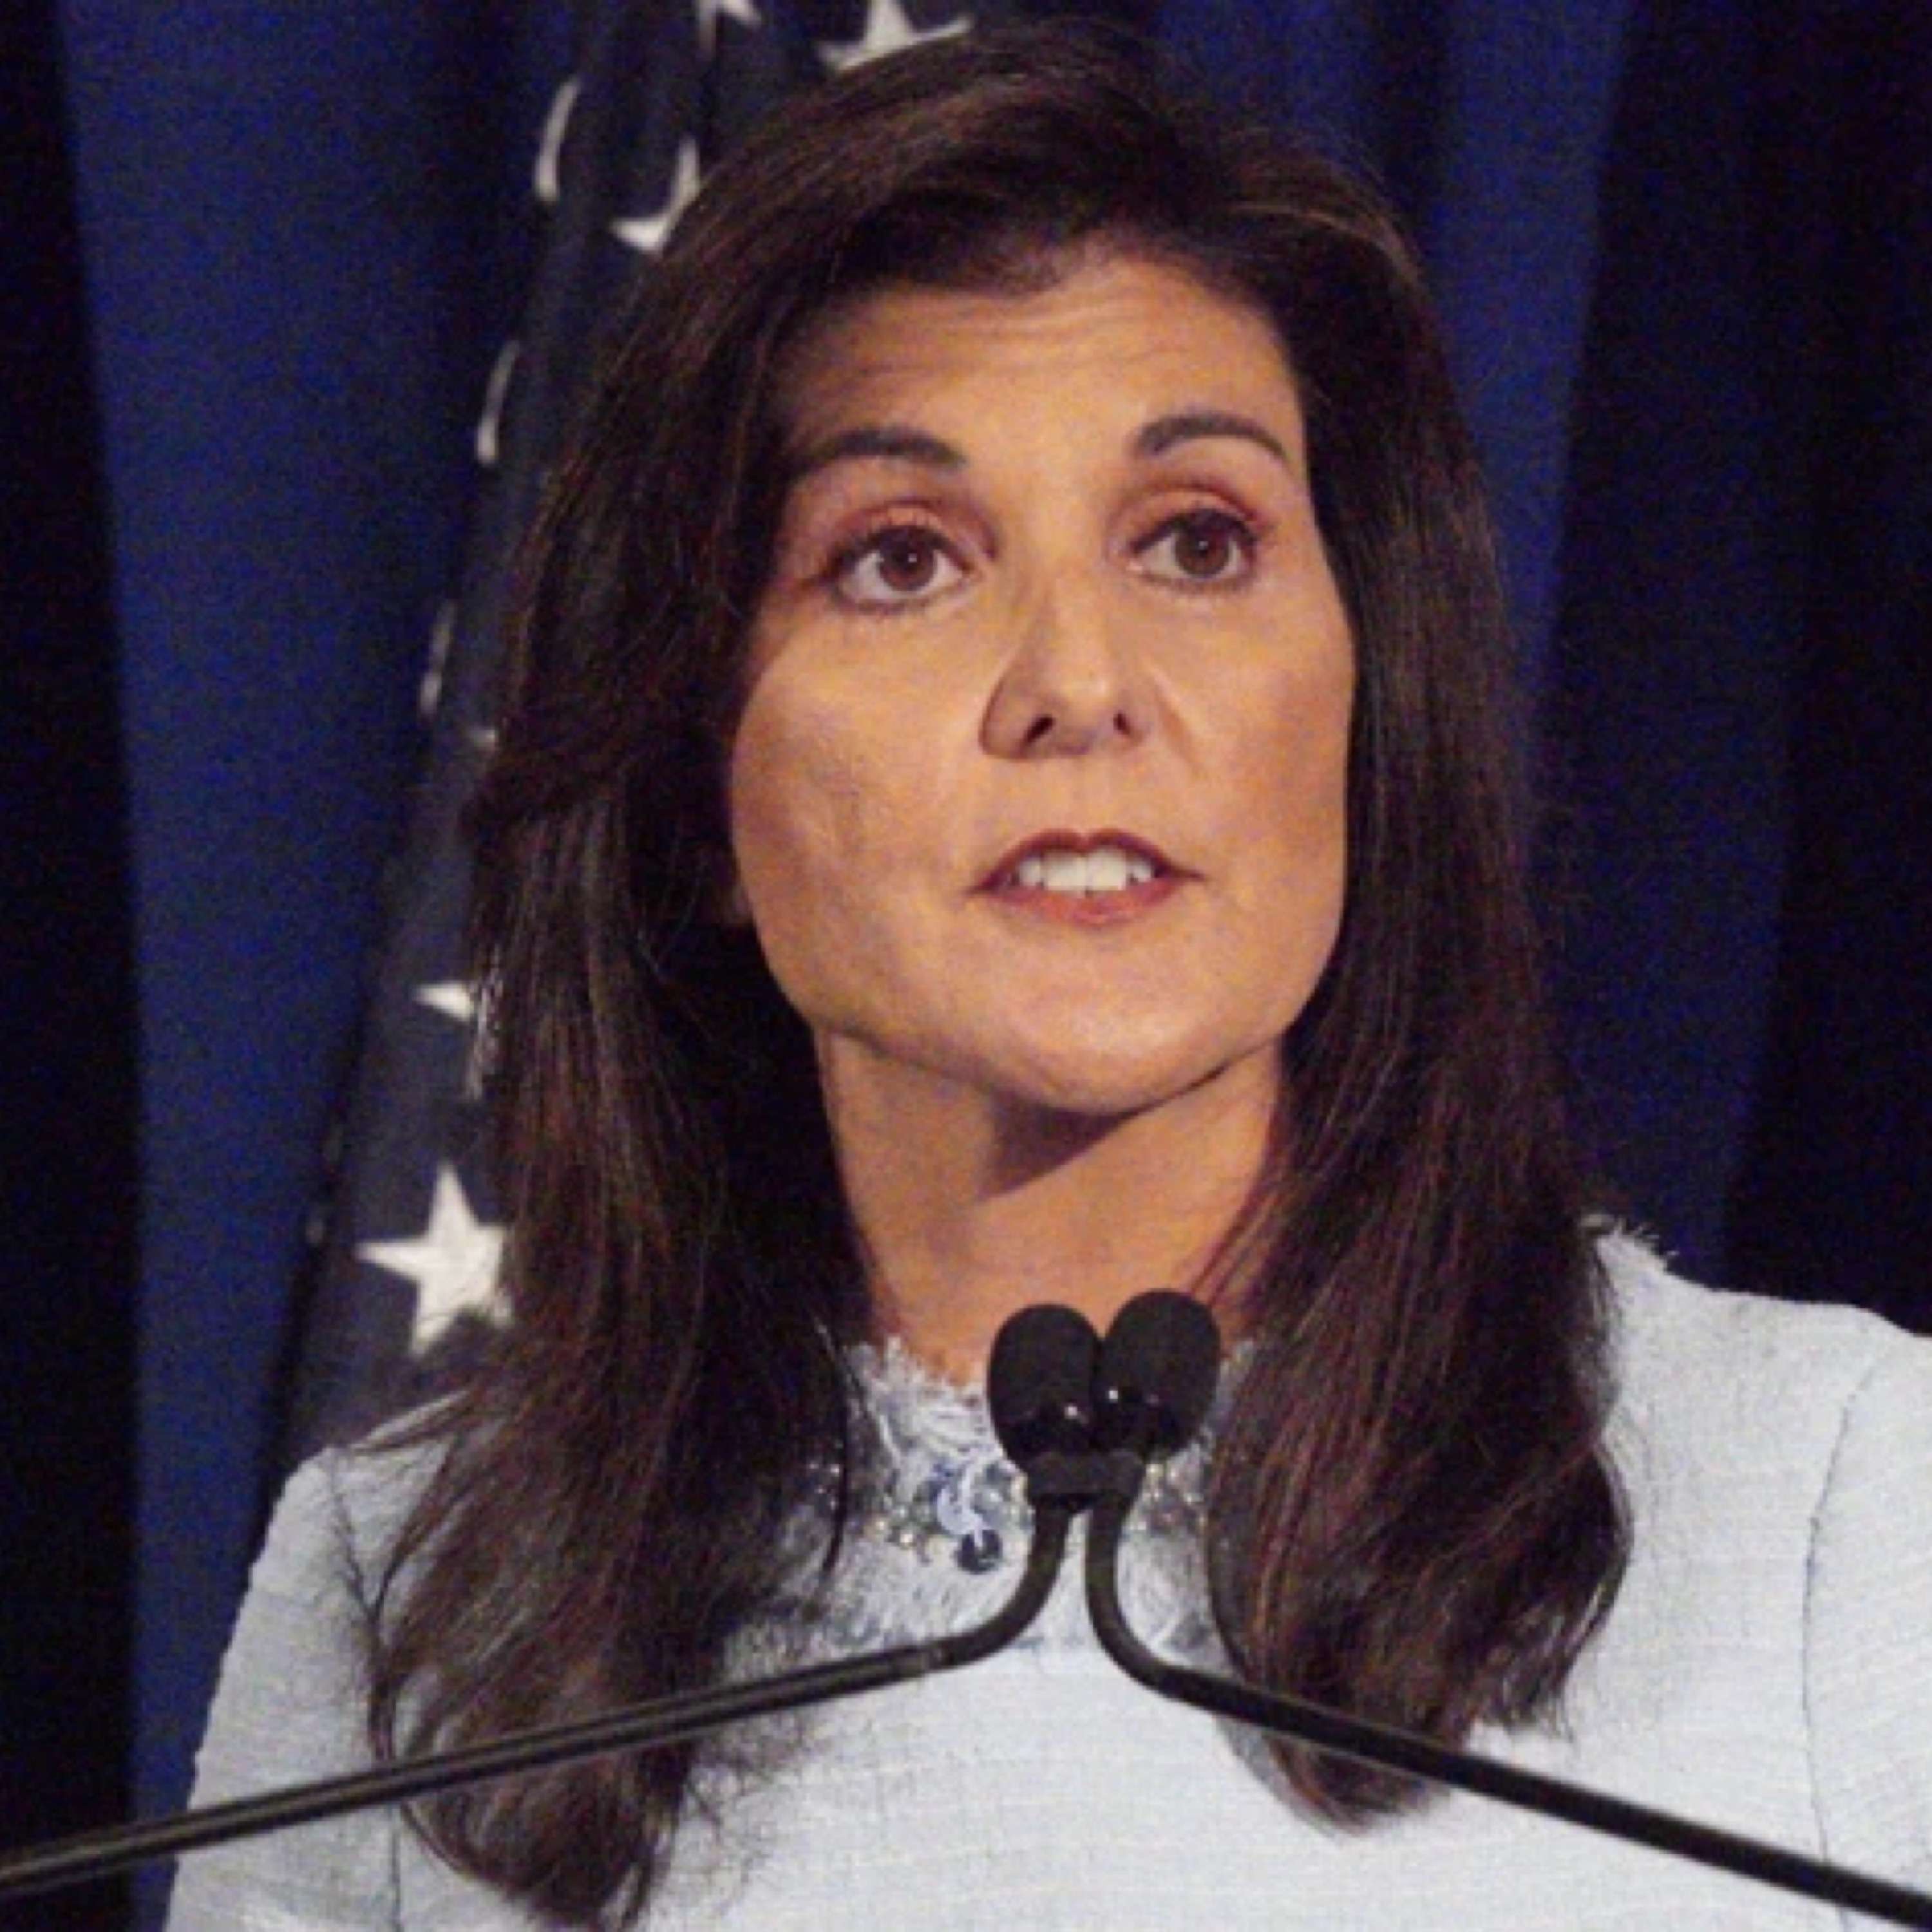 Nikki Haley to Exit Race, Biden Admin Pays Activist to Promote Transgenderism, Pro-Life Group Investigates Coerced Abortions